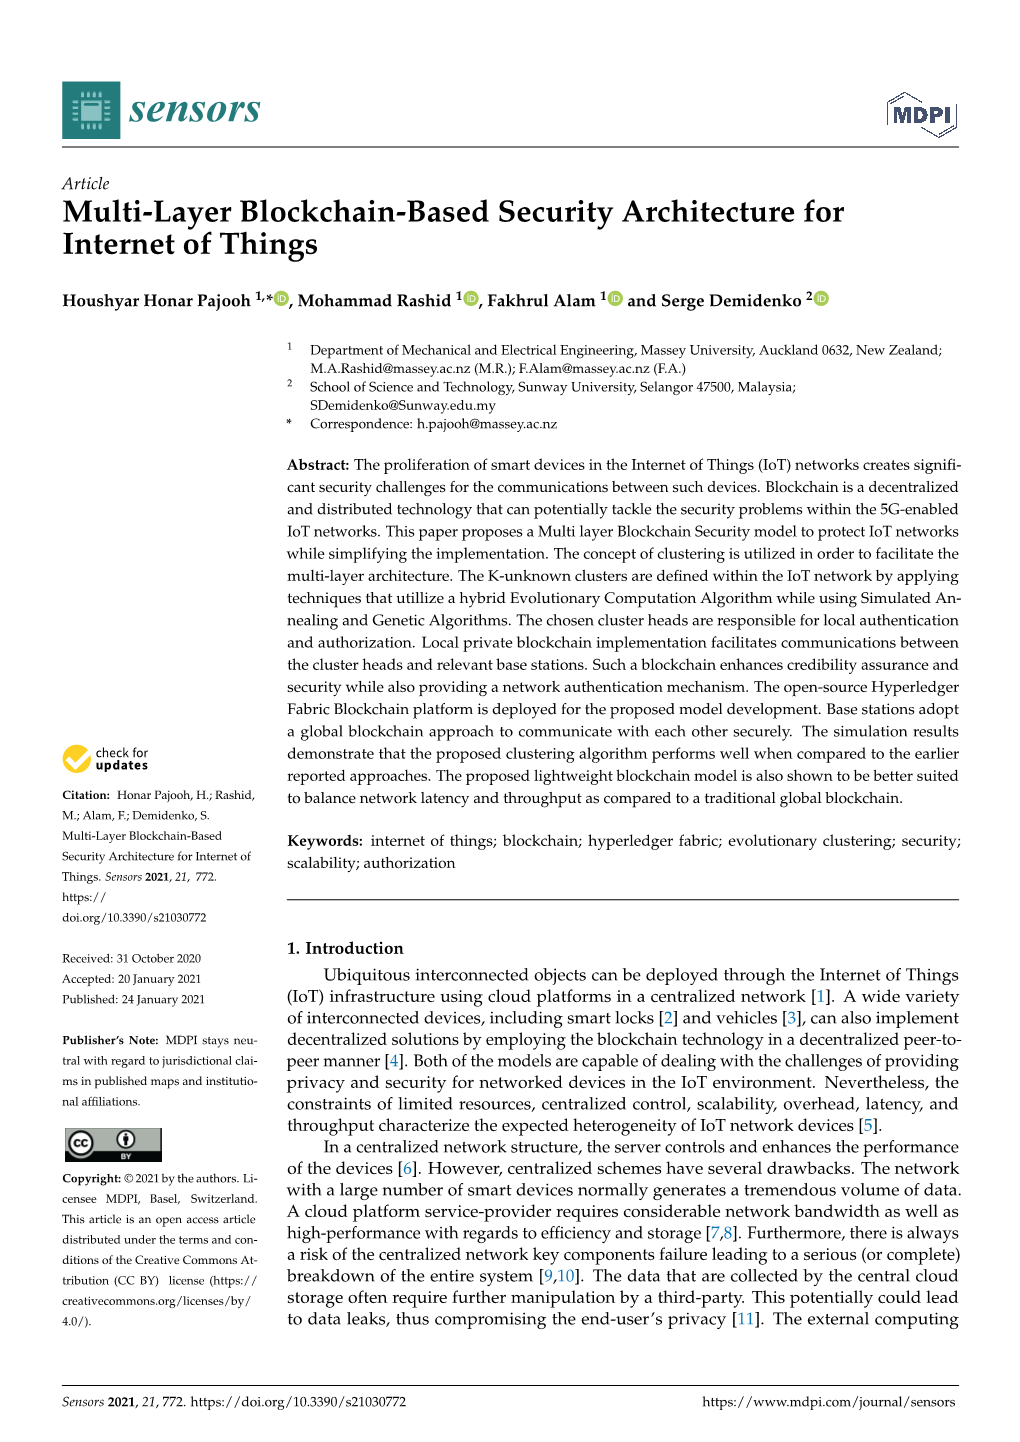 Multi-Layer Blockchain-Based Security Architecture for Internet of Things